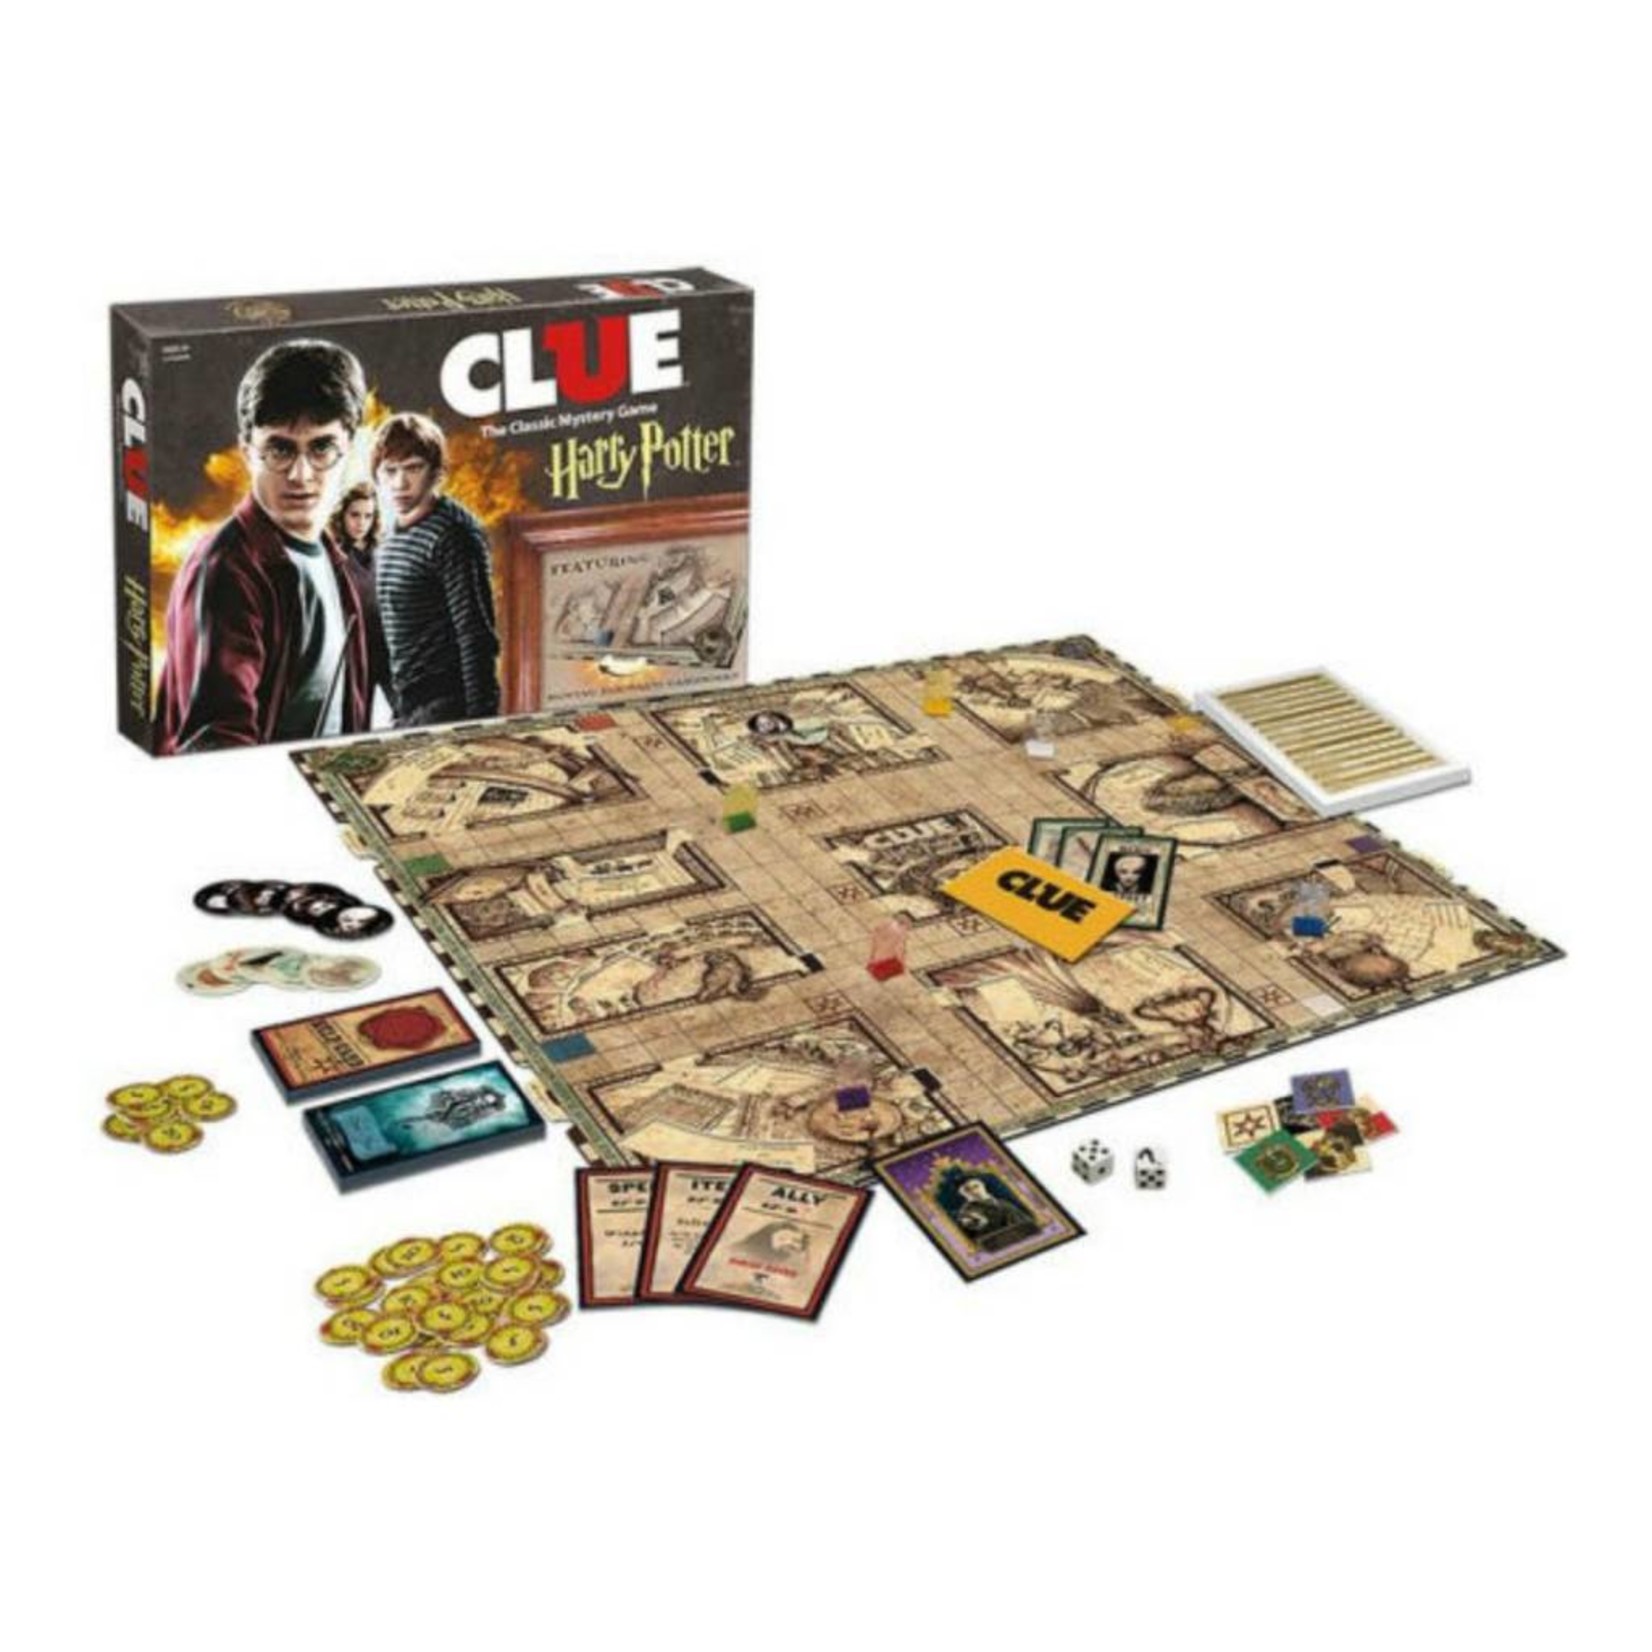 USAopoly Clue - Harry Potter